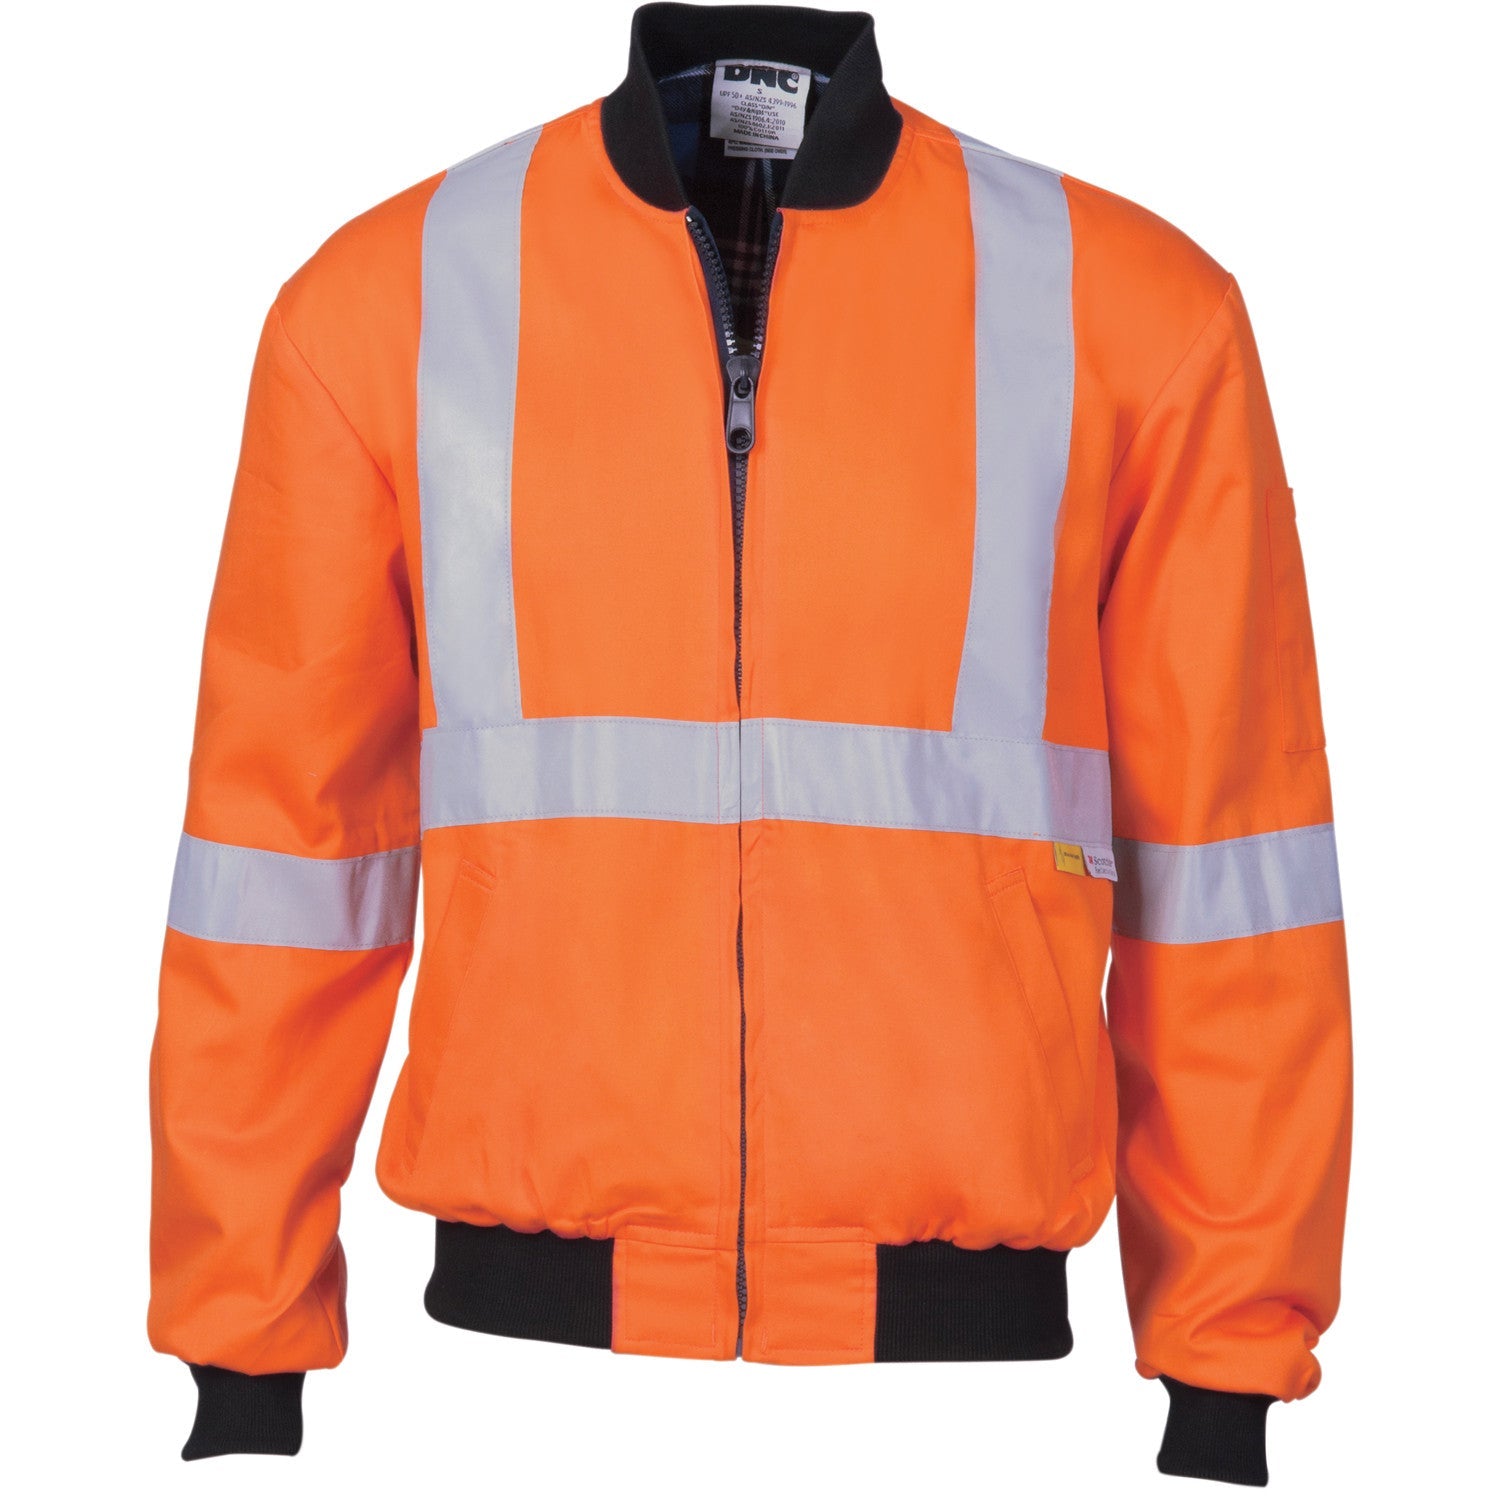 DNC HiVis Cotton Bomber Jacket with Back & additional CSR R/Tape below (3759)